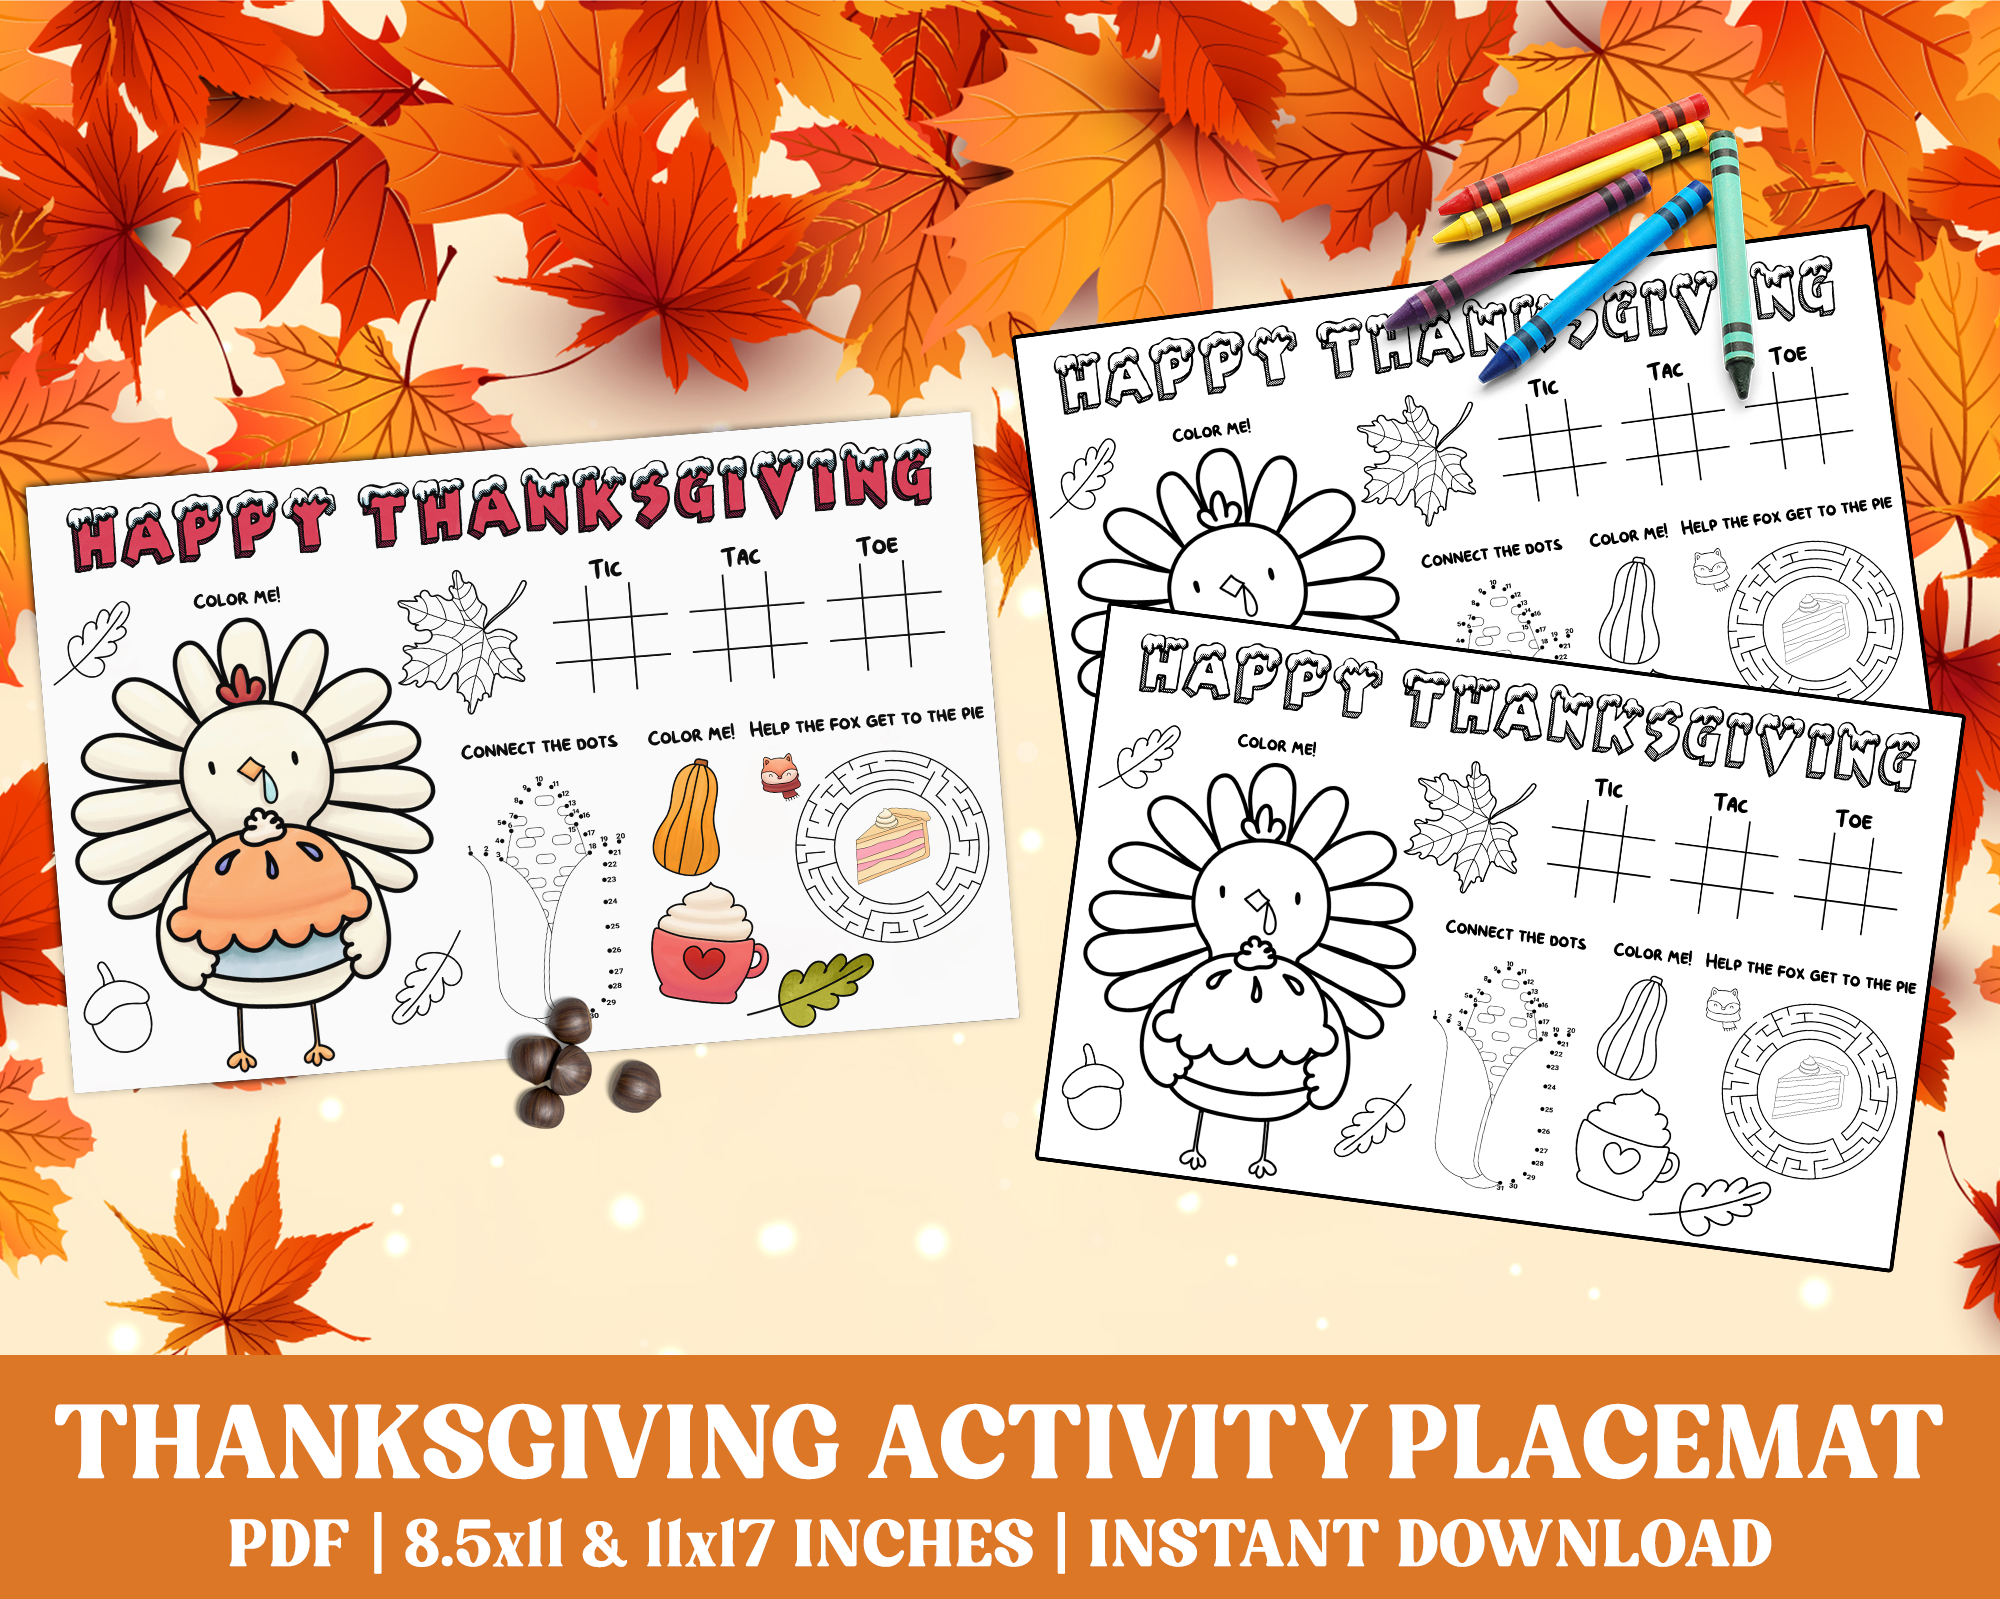 Pdf thanksgiving activities for kids kids thanksgiving activity placemat made by teachers